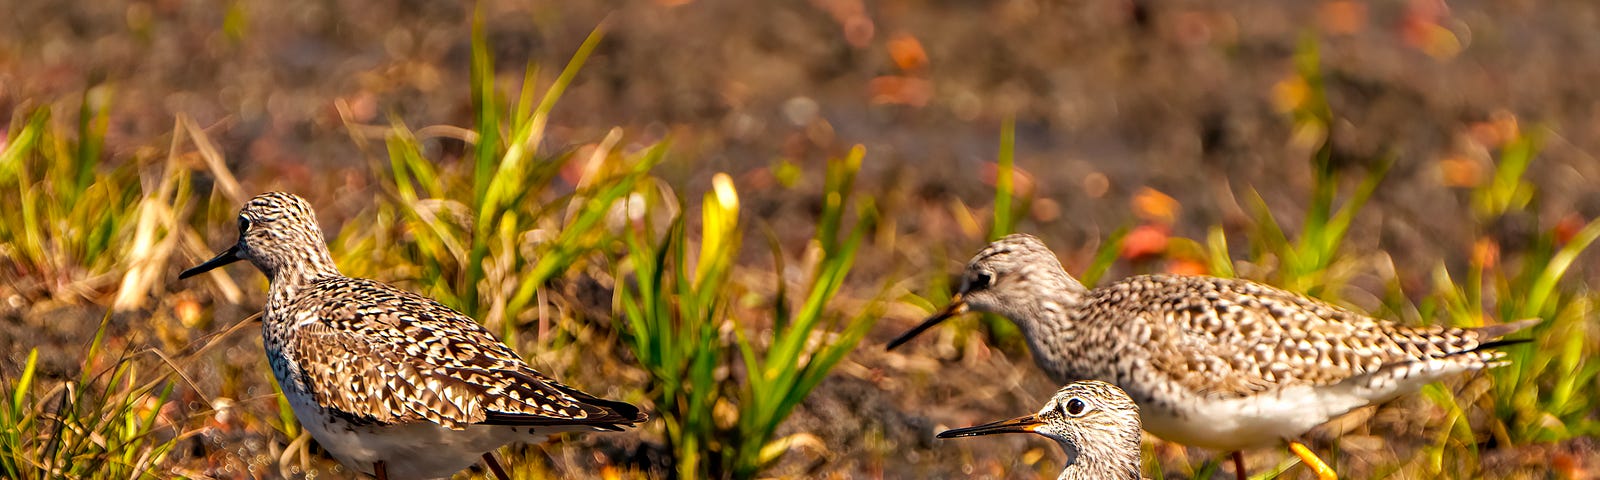 Common Sandpiper birds close-up side view foraging for food in a marsh environment and habitat with a blur foliage background